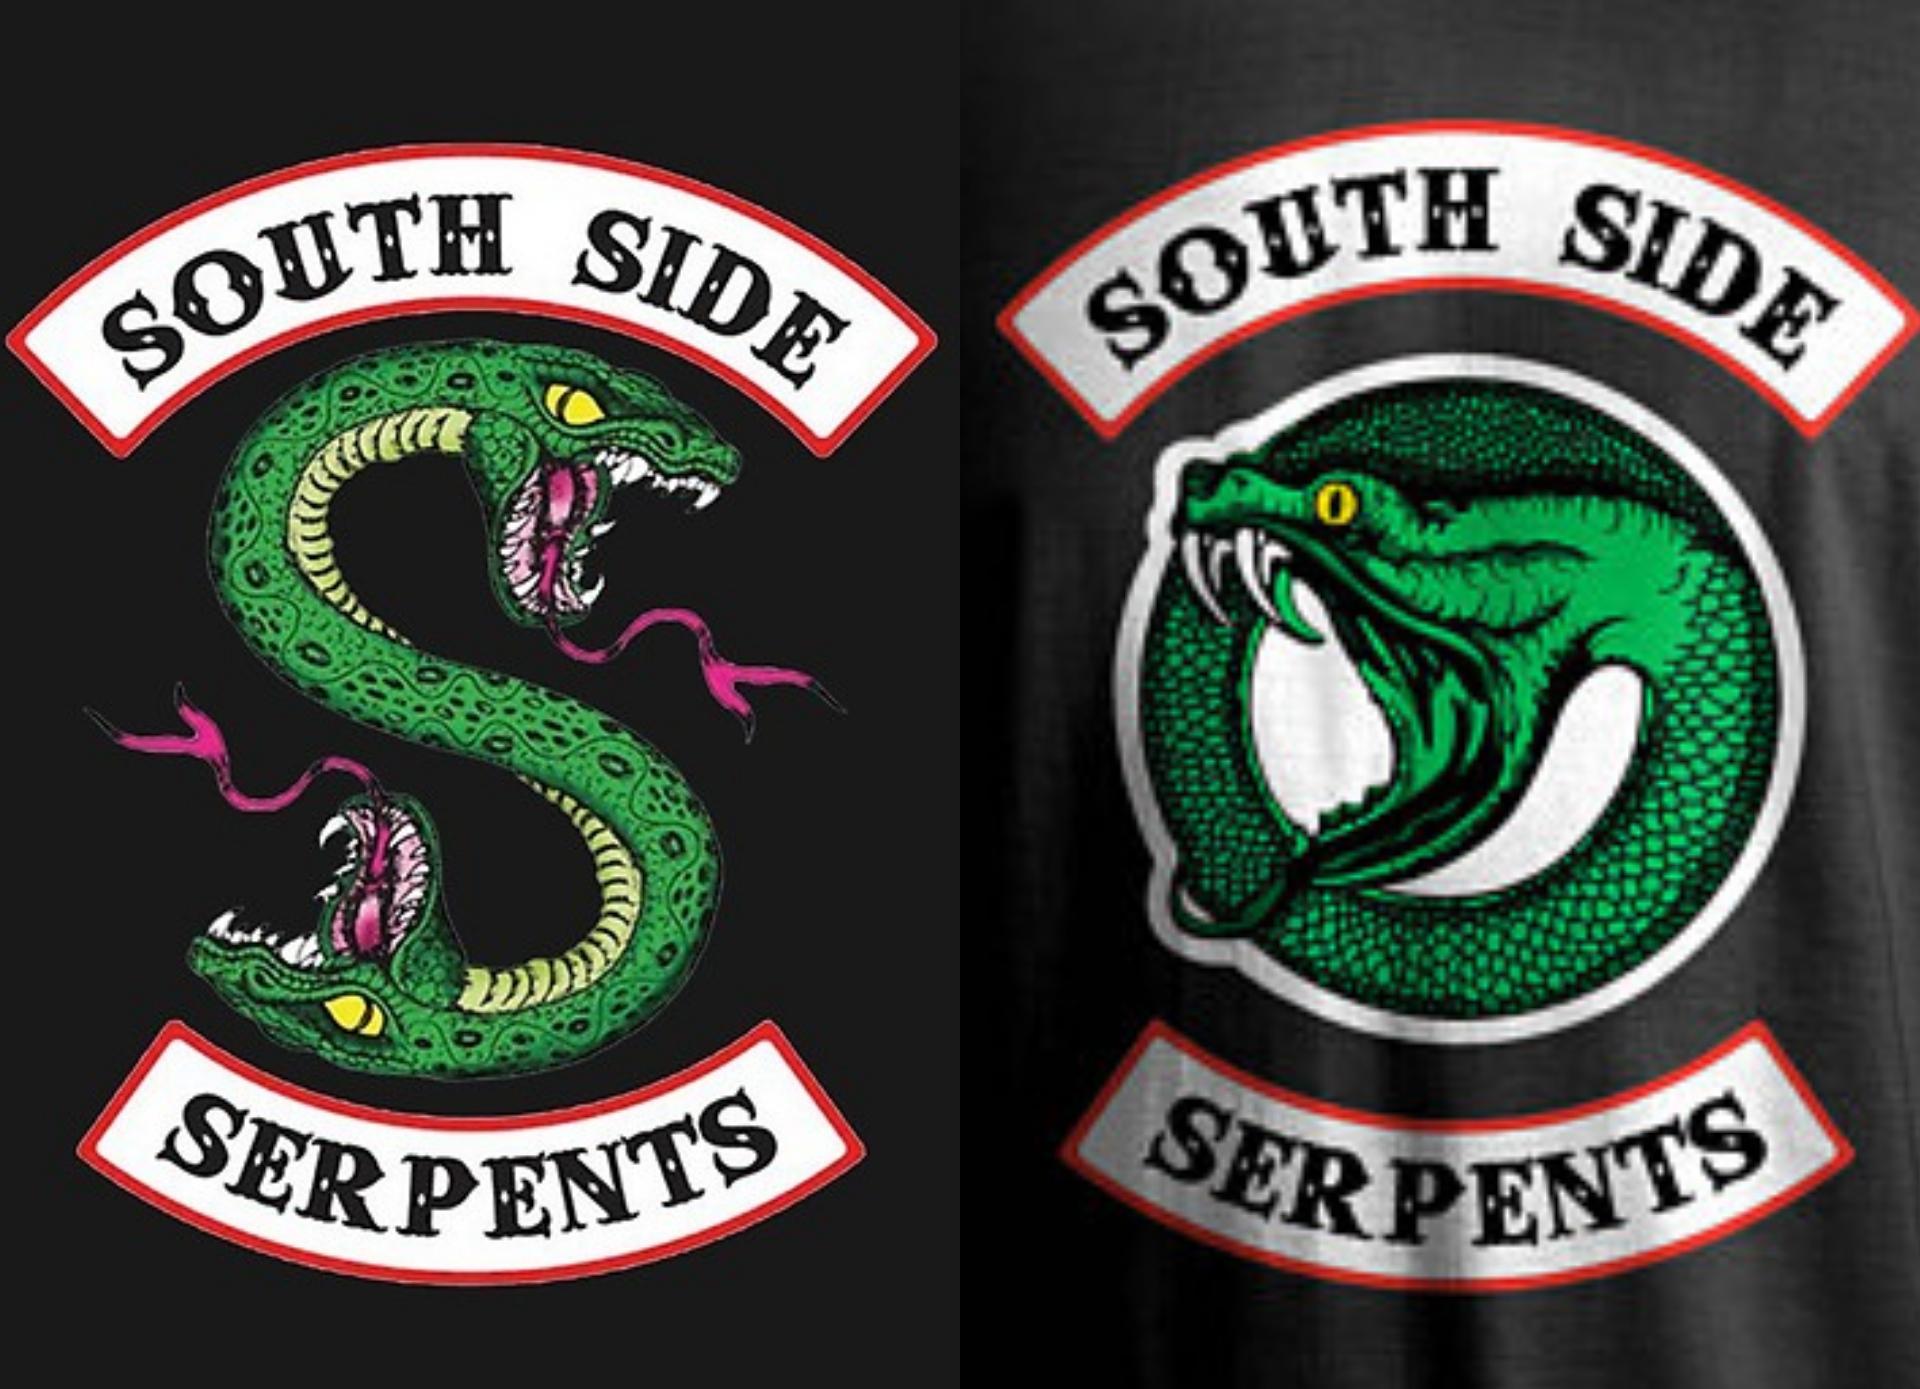 Riverdale Logo - What's up with the logo change? All the serpents now have